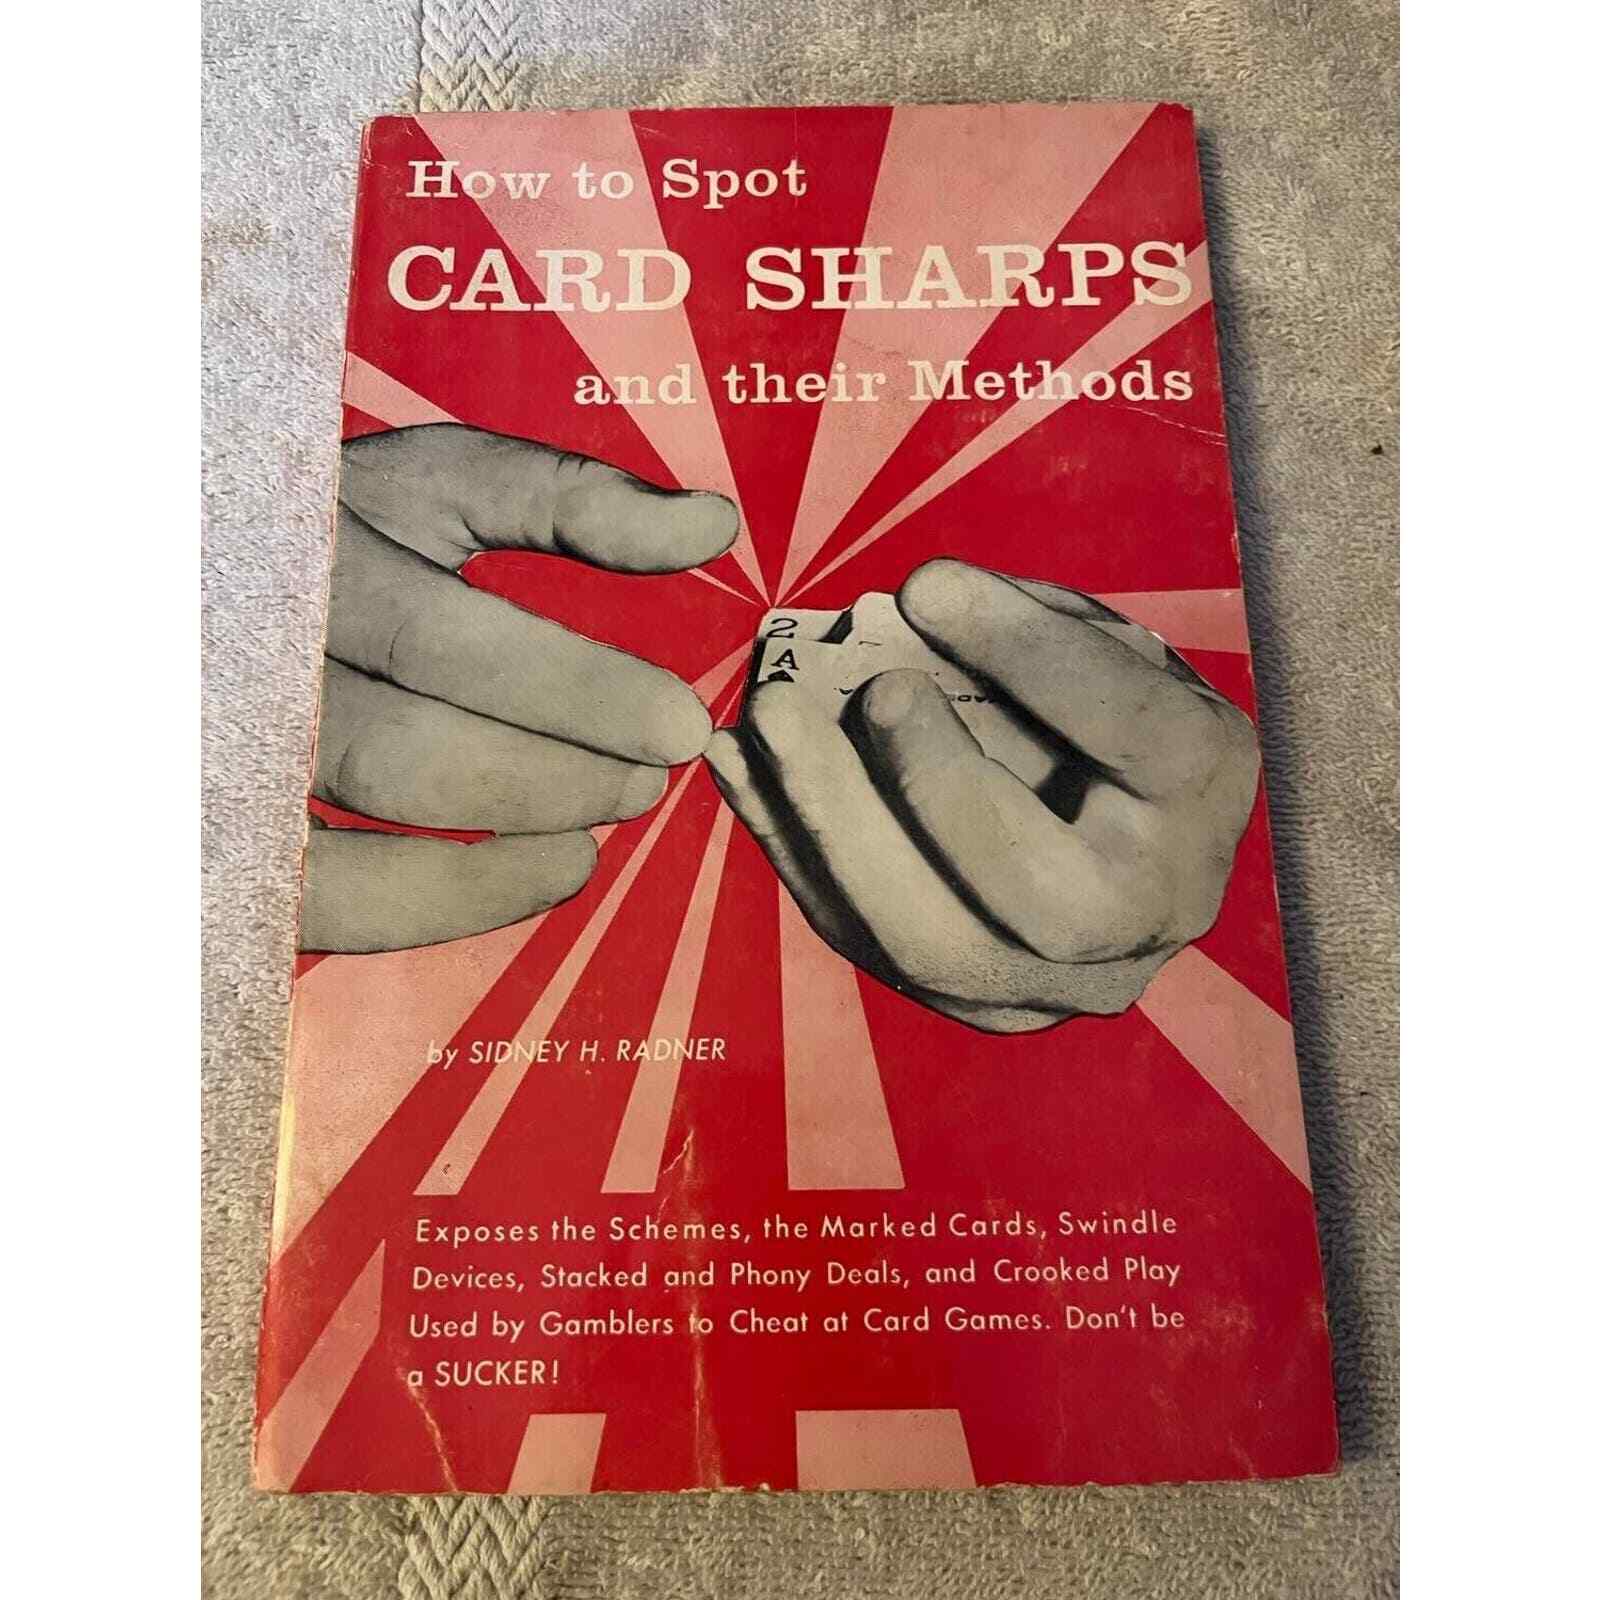 How To Spot Card Sharps and Their Methods by Sidney H. Radner 1957 Gambling